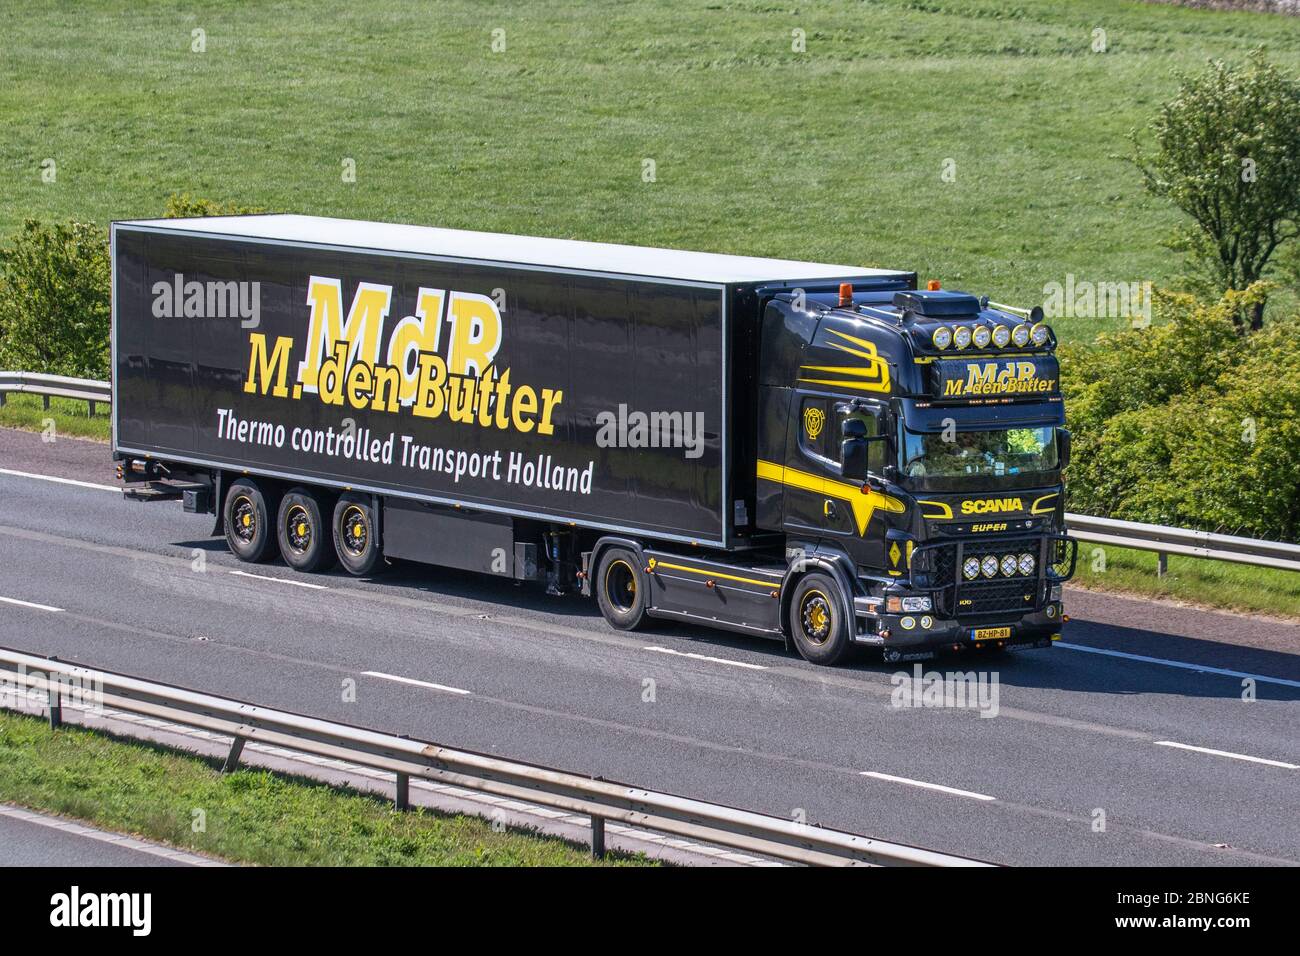 M.Den Butter ; MdB HGV Thermo controlled Haulage delivery trucks, lorry, transportation, truck, cargo carrier, vehicle, European Dutch commercial transport industry, distribution service M6 at Manchester, UK Stock Photo